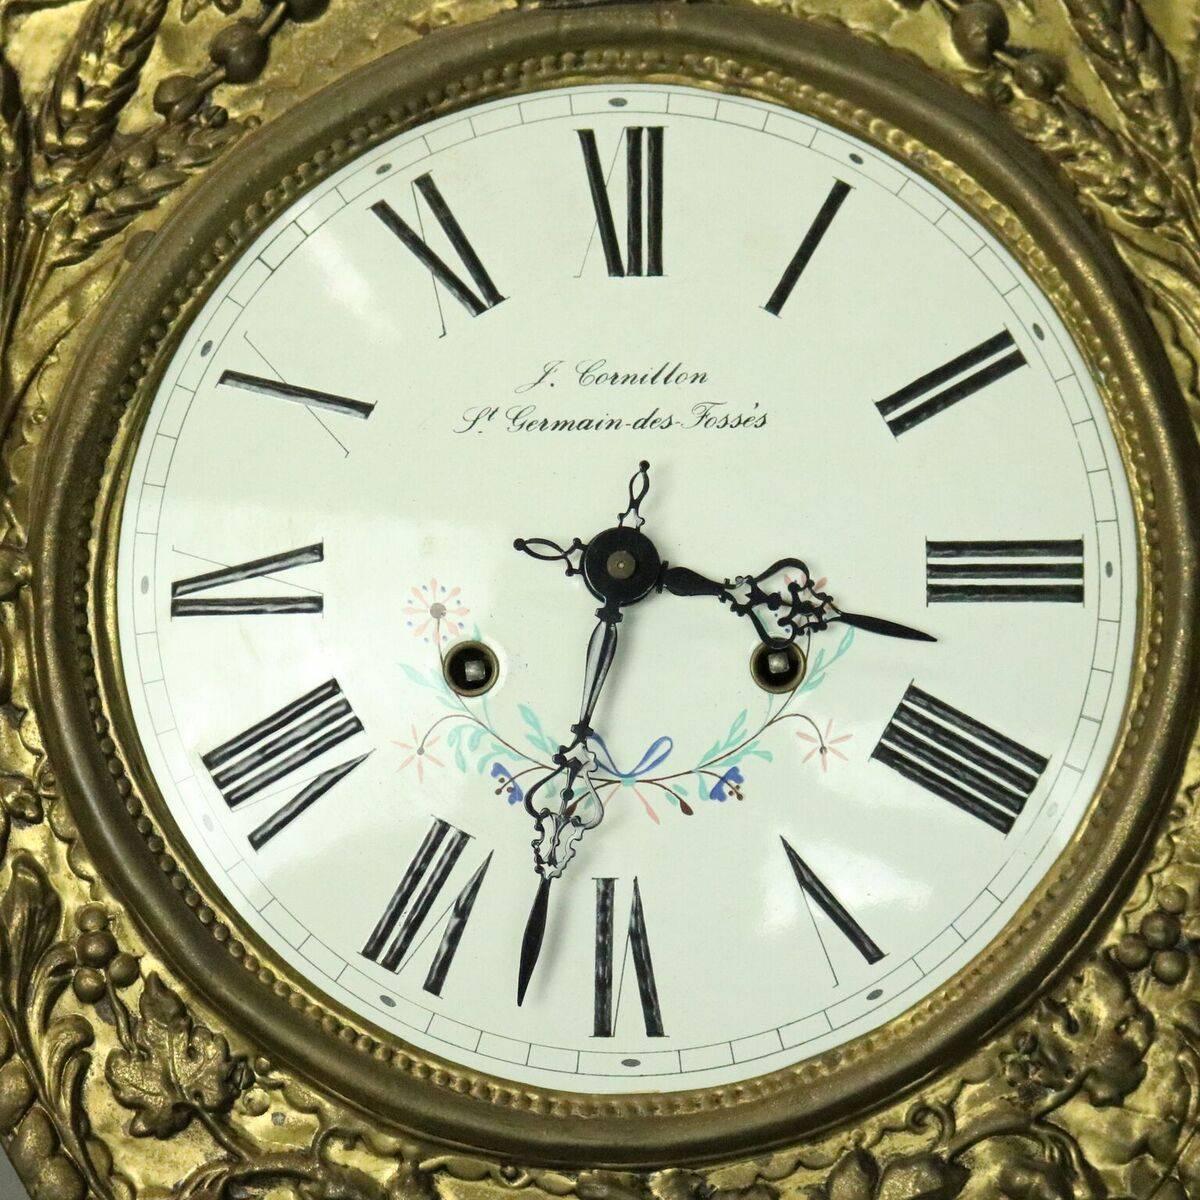 Antique French Rococo wag-on-wall clock features cast brass construction in urn and foliate decoration, enamel face with J. Cornillon, St. Germain-des-Fosses's, circa 1860.

Measures - 58" H X 13" W X 6.5" D.